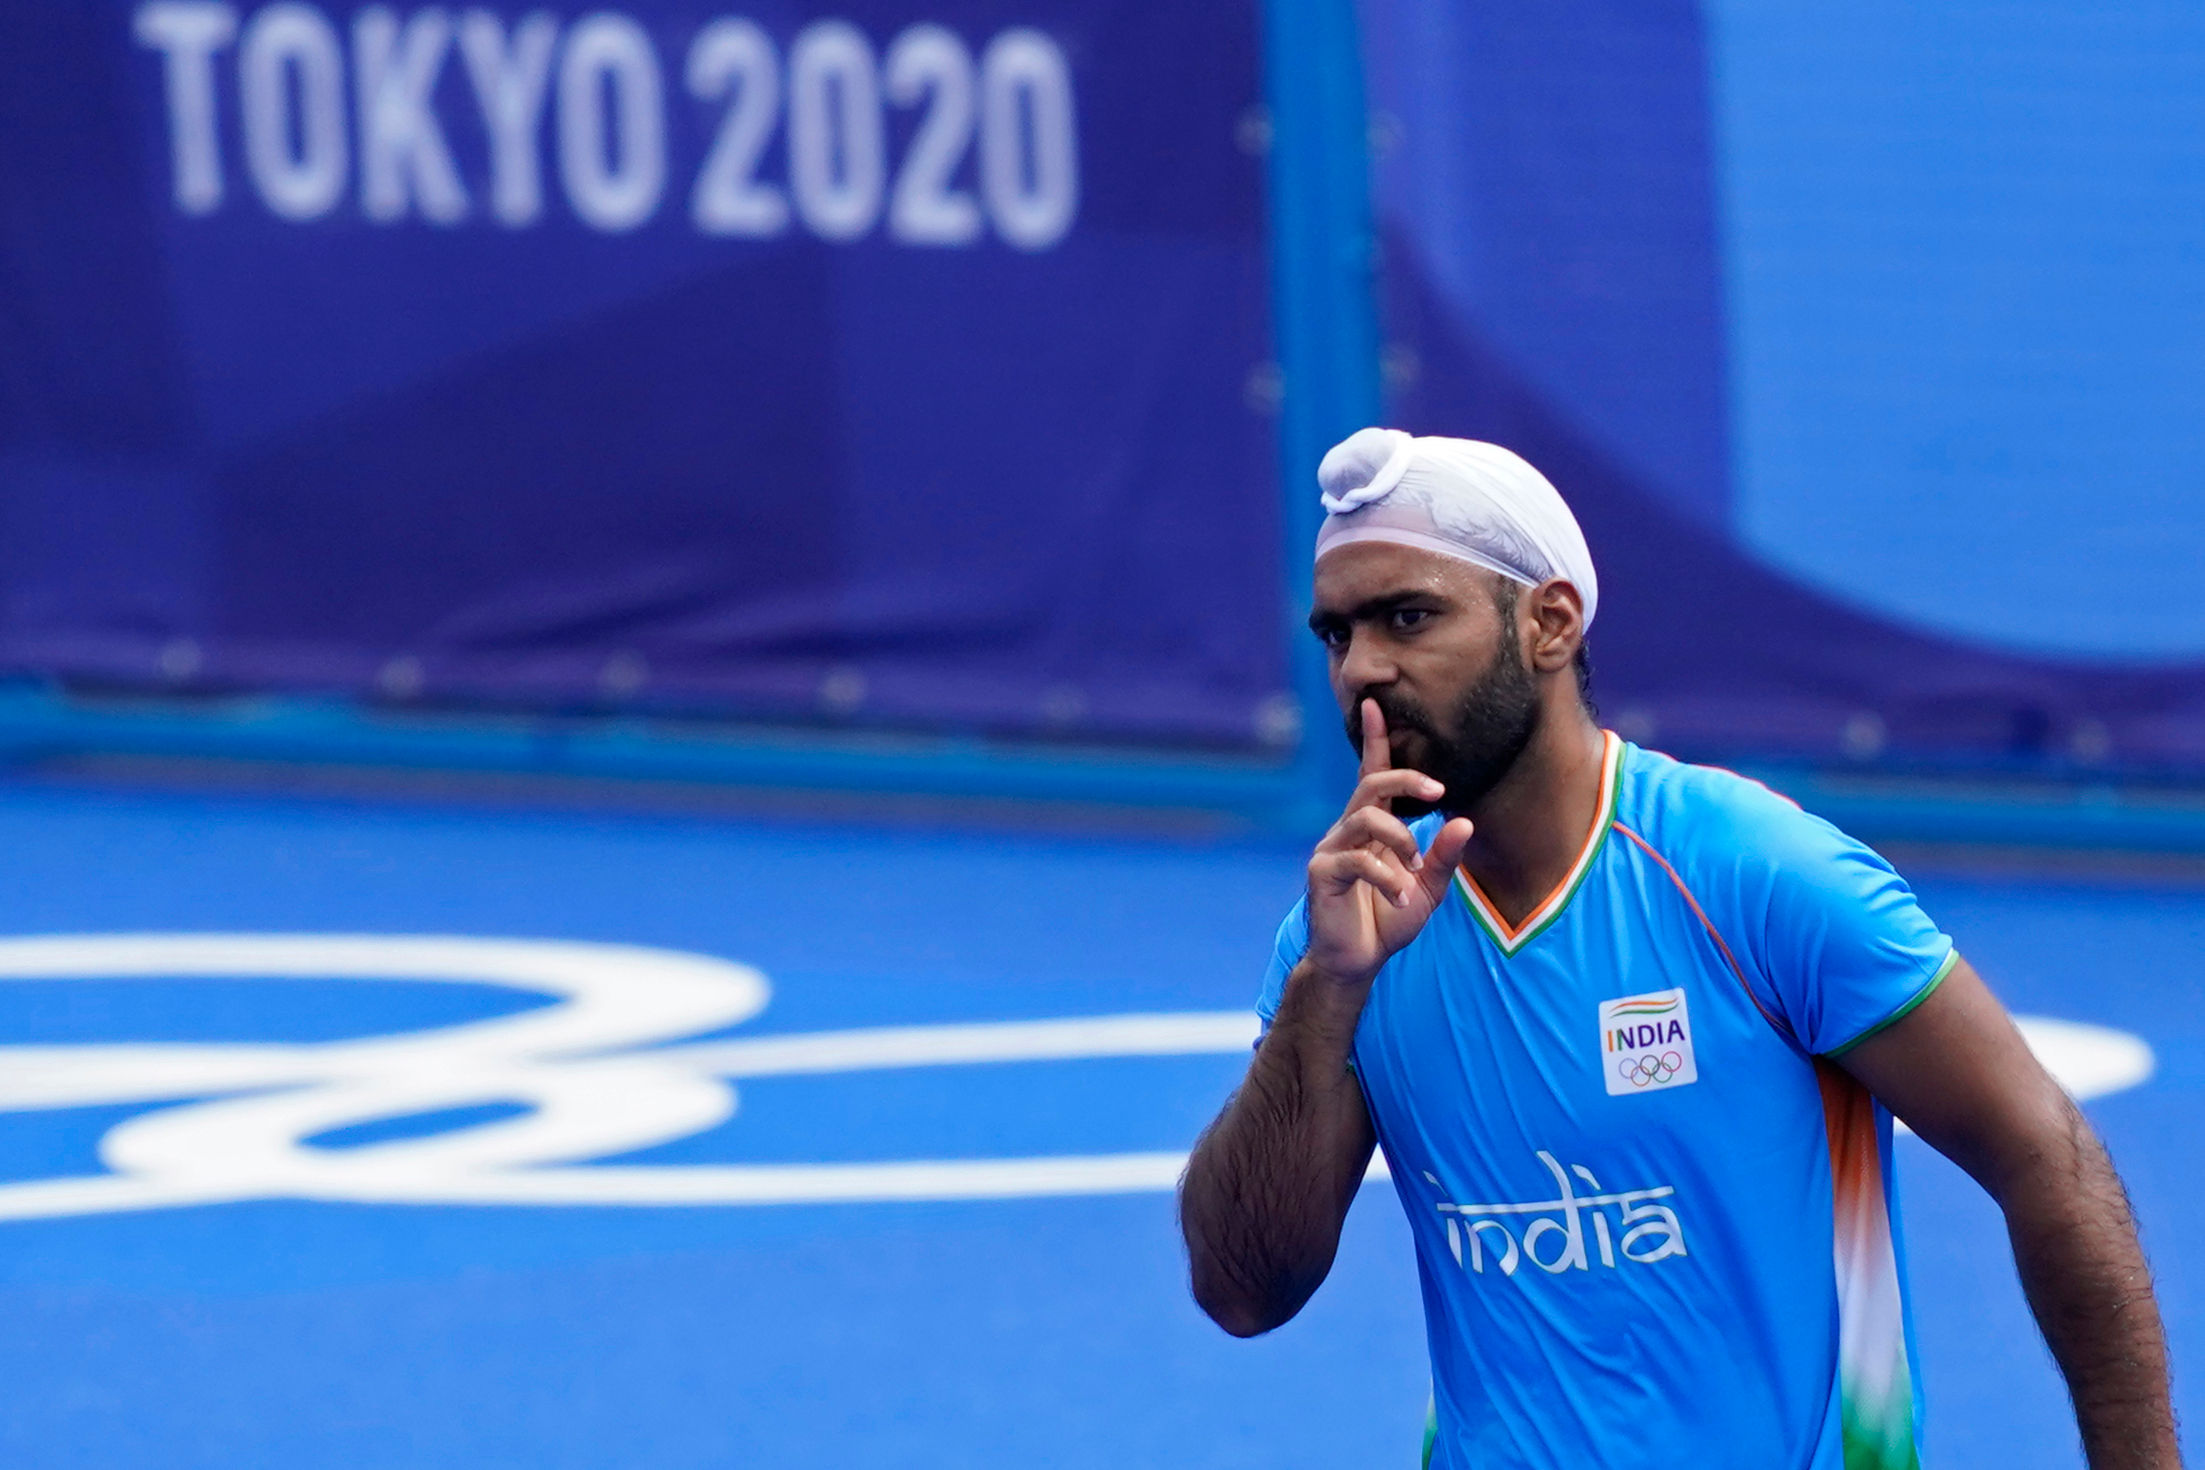 Tokyo Olympics: Indian hockey team pips Argentina 3-1, enters quarters